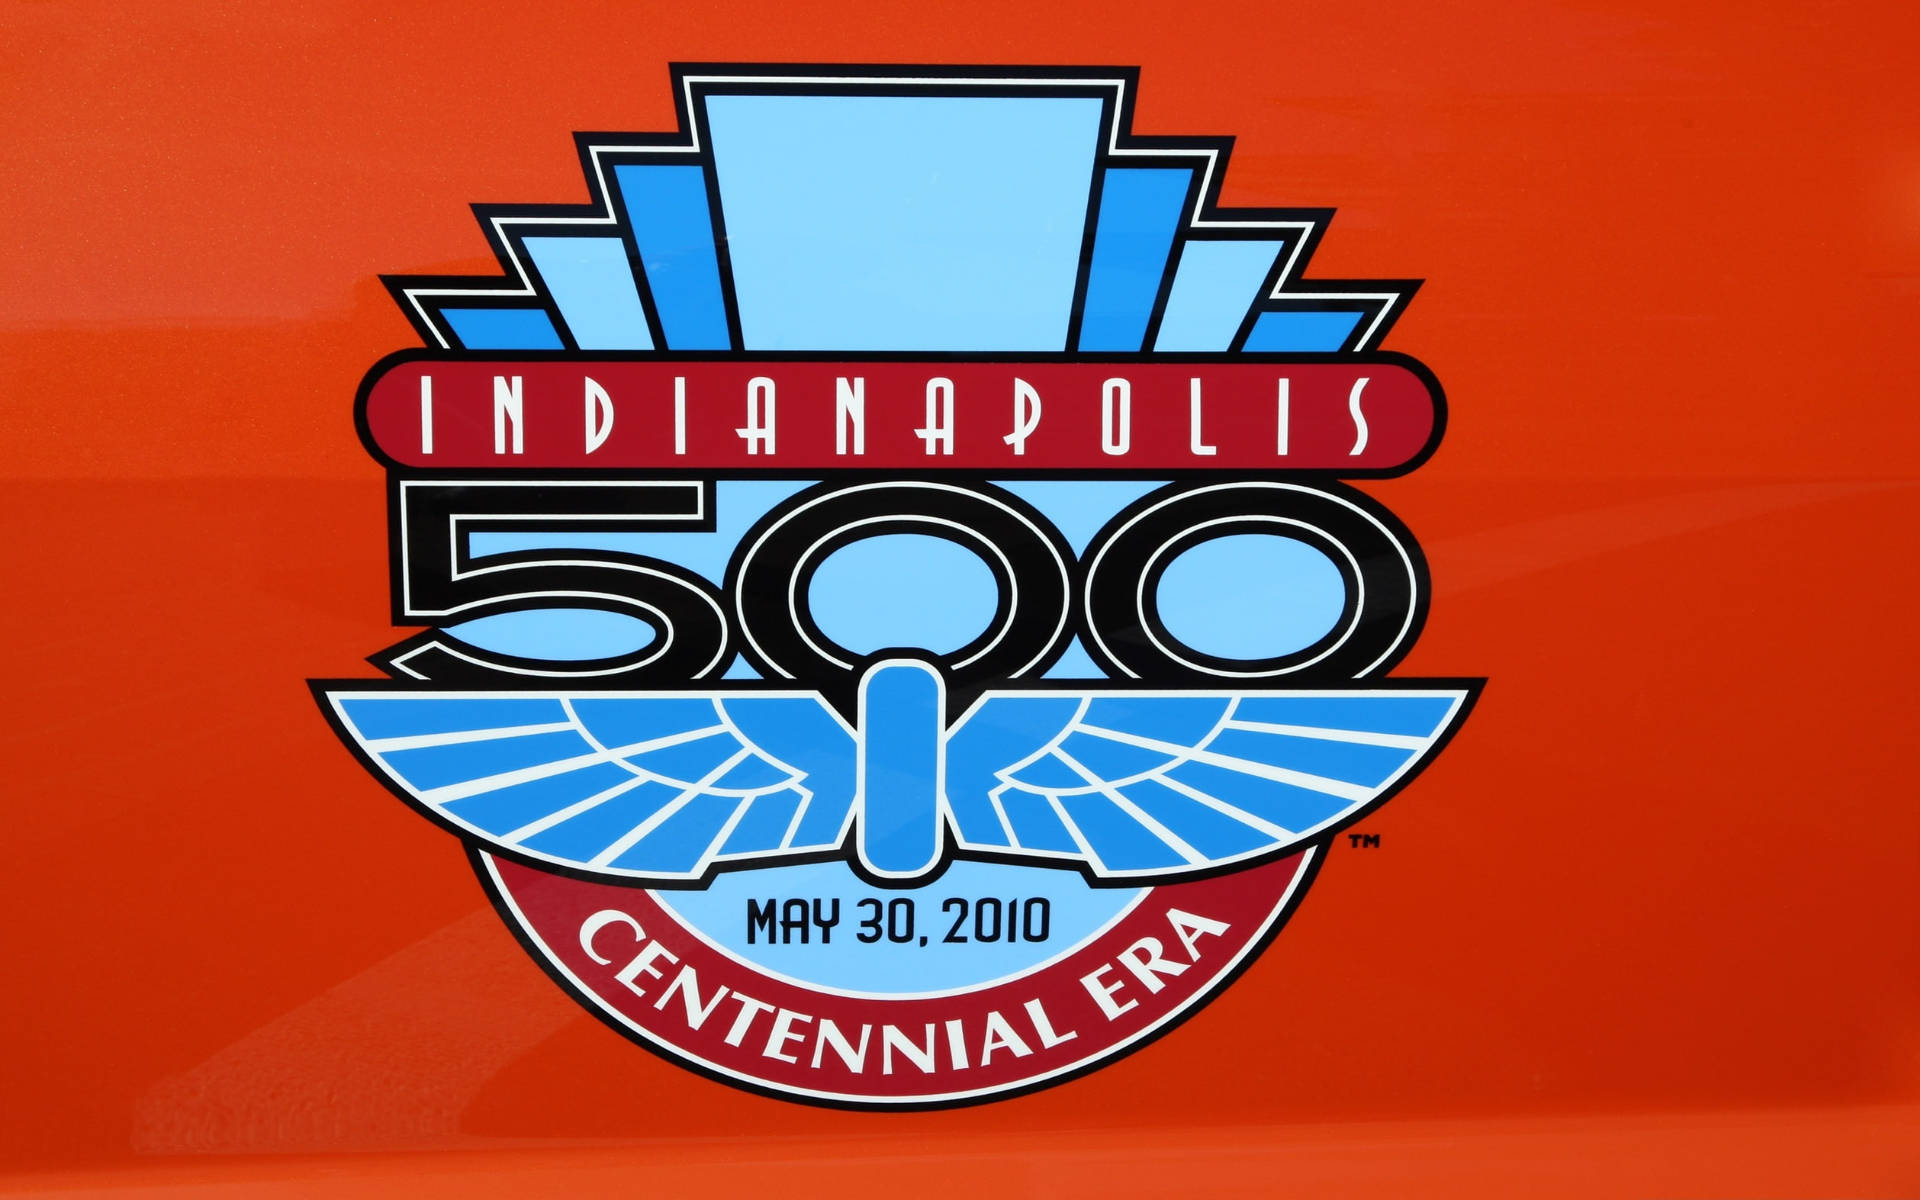 Indianapolis 500 Pictures Wallpaper